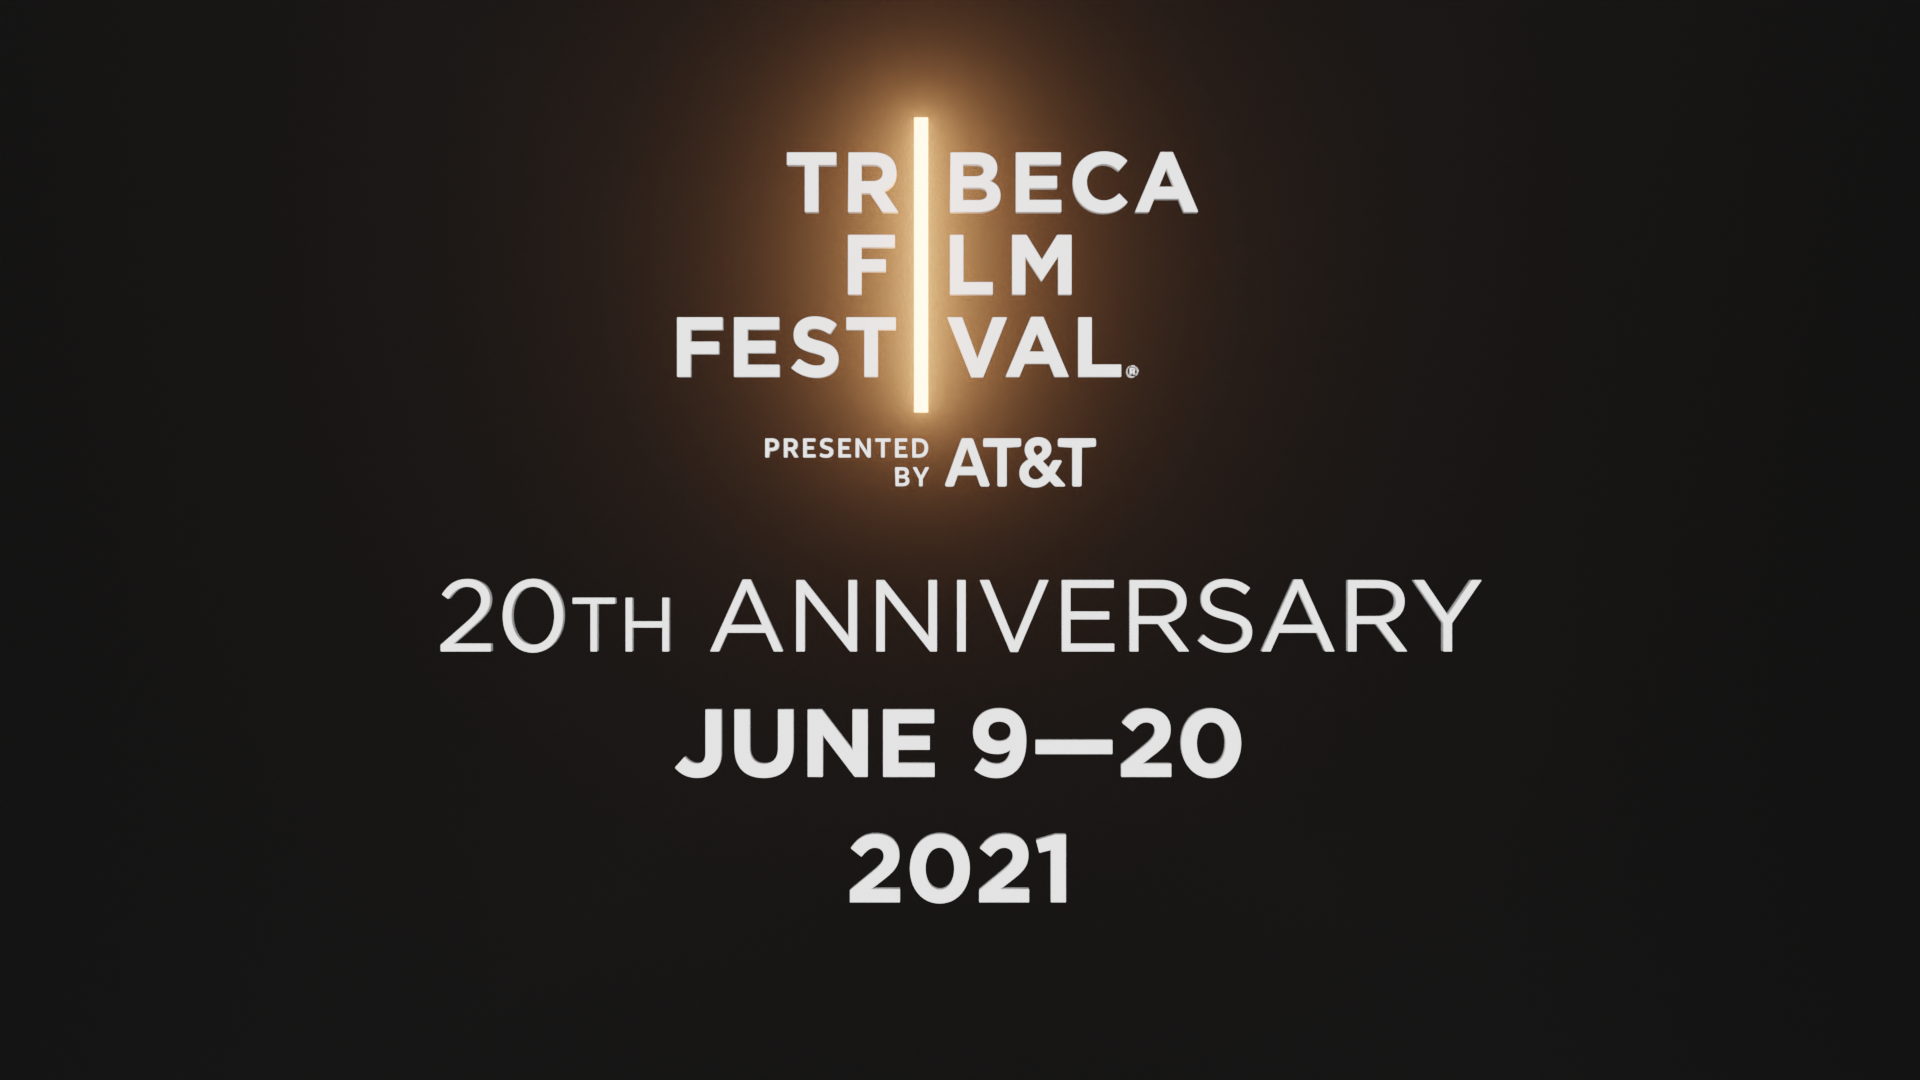 Tribeca Film Festival Confirms 20th Edition In 2021, Shifting Dates To June